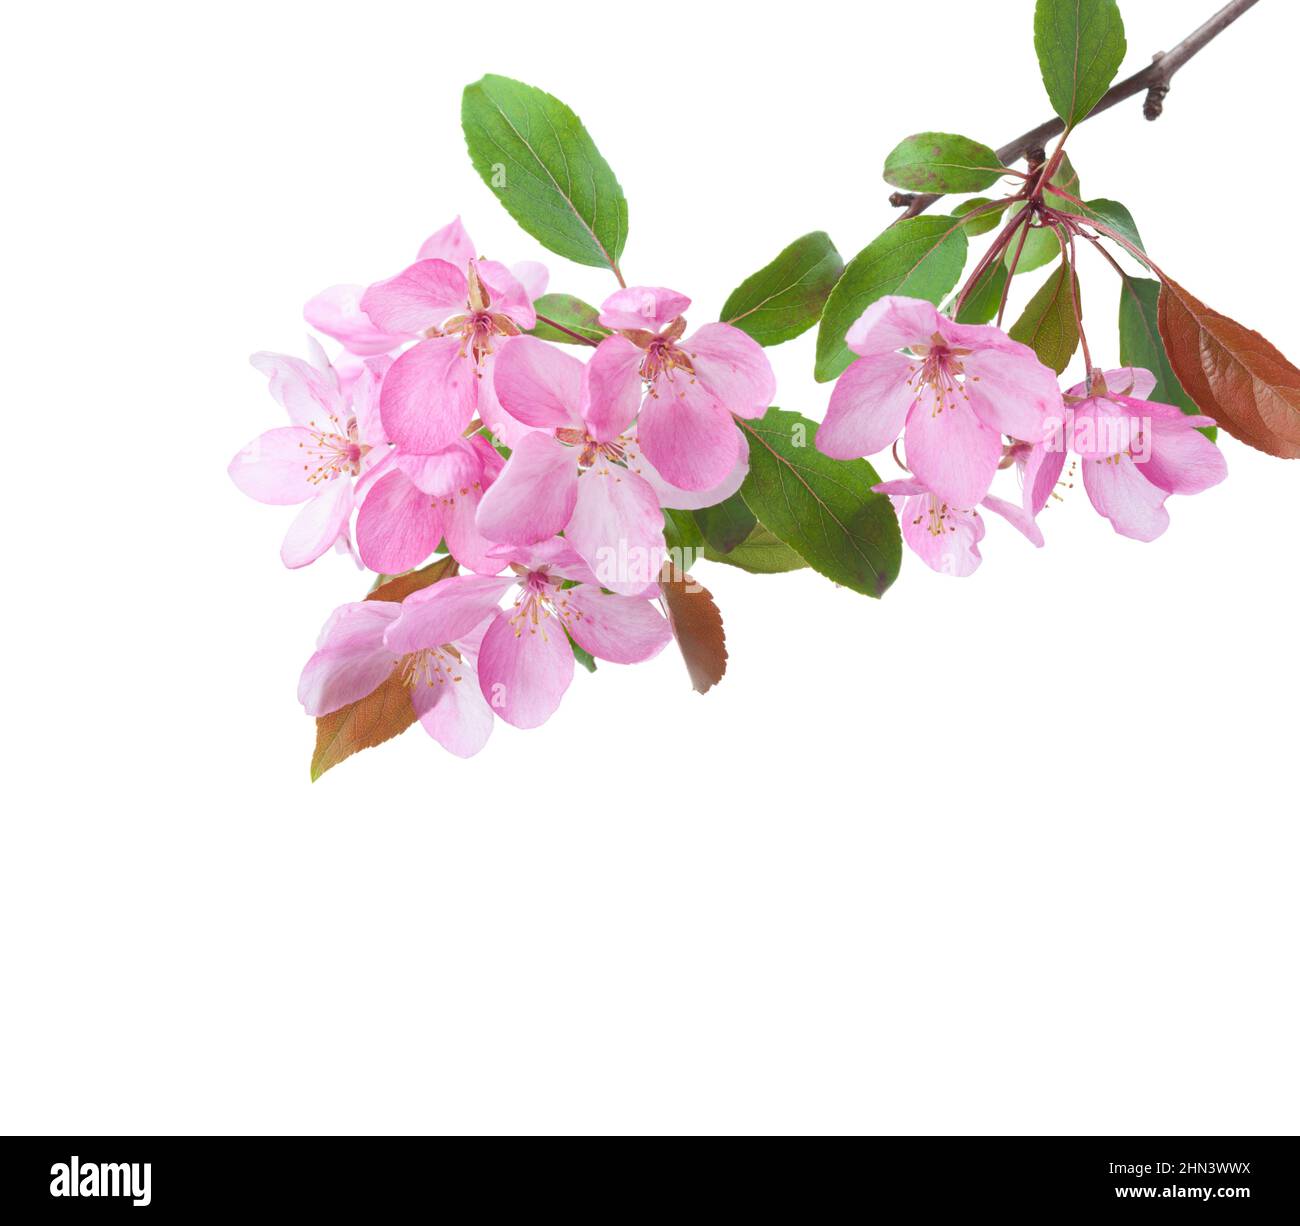 Branch with light pink flowers  and leaves of decorative Apple tree  isolated on white background. Stock Photo